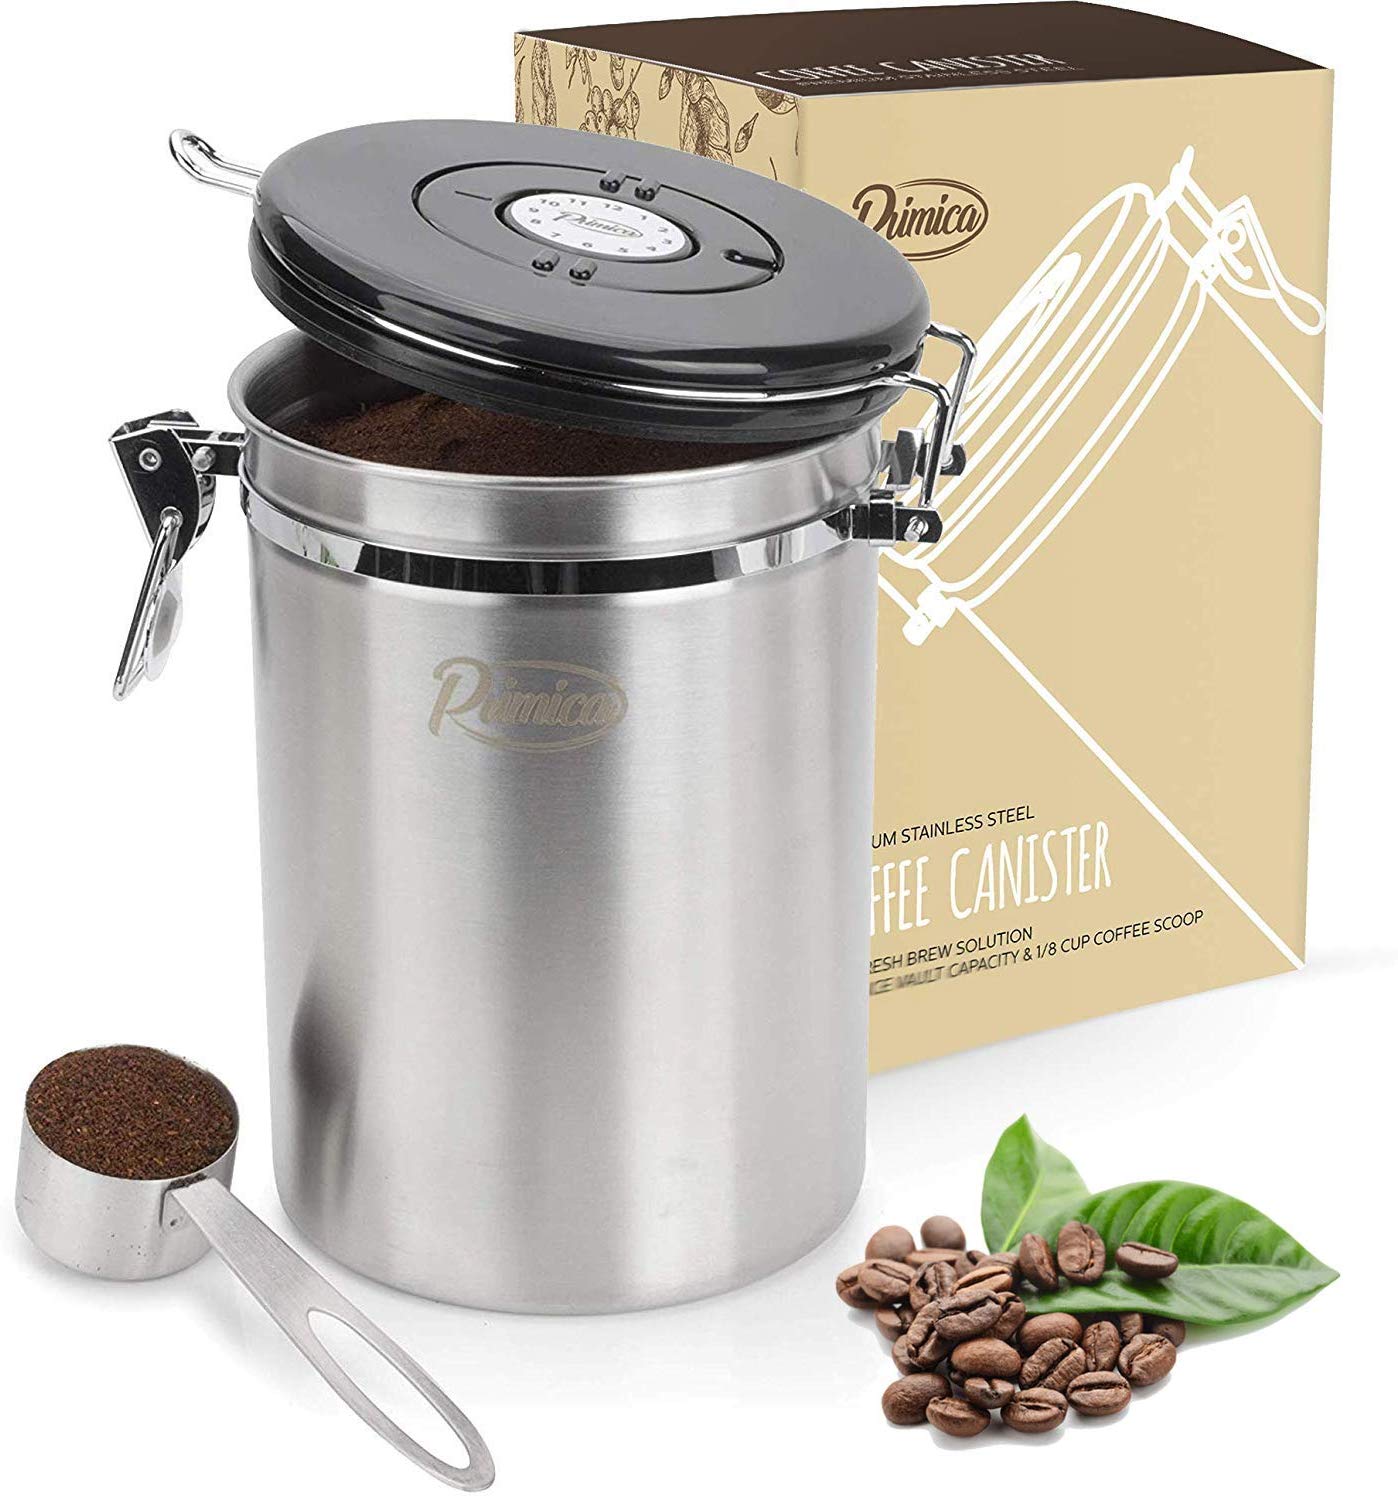 Primica Premium Stainless Steel Coffee Canister